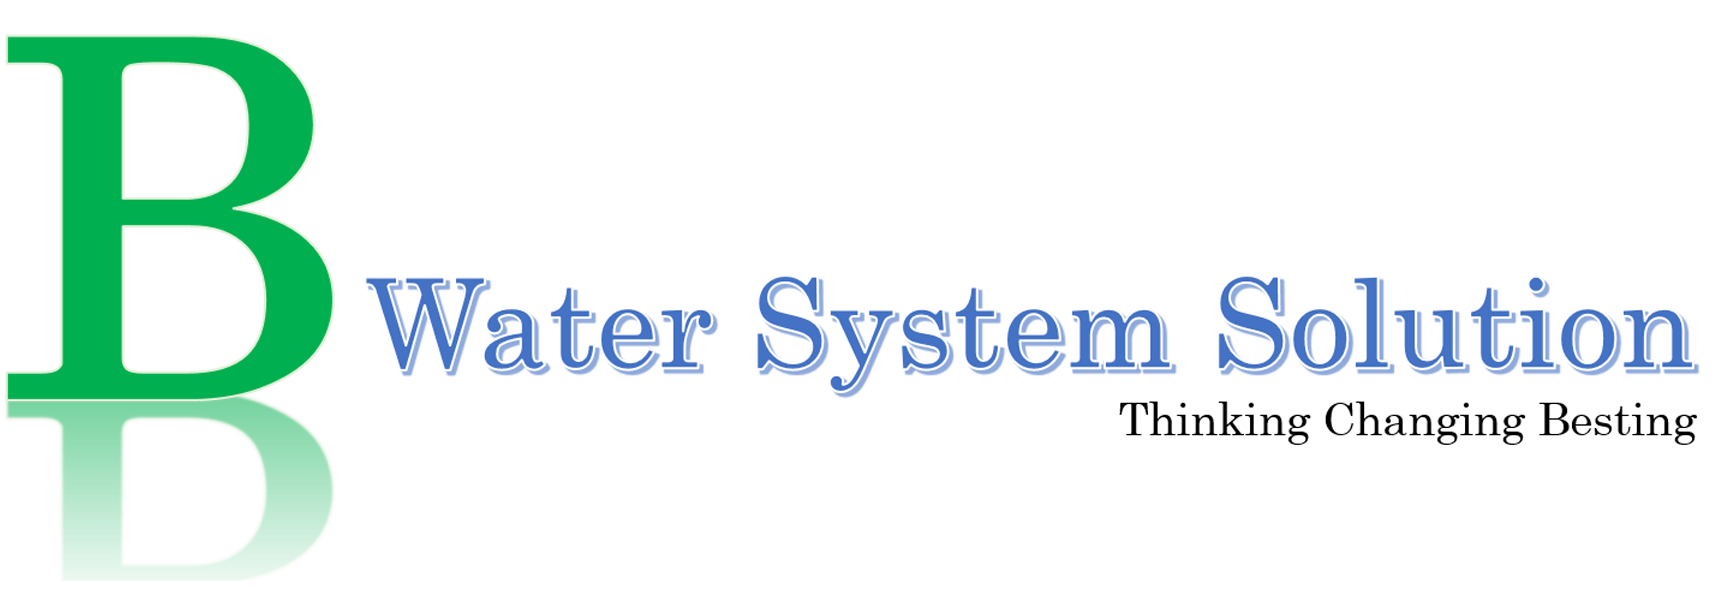 B Water System Solution